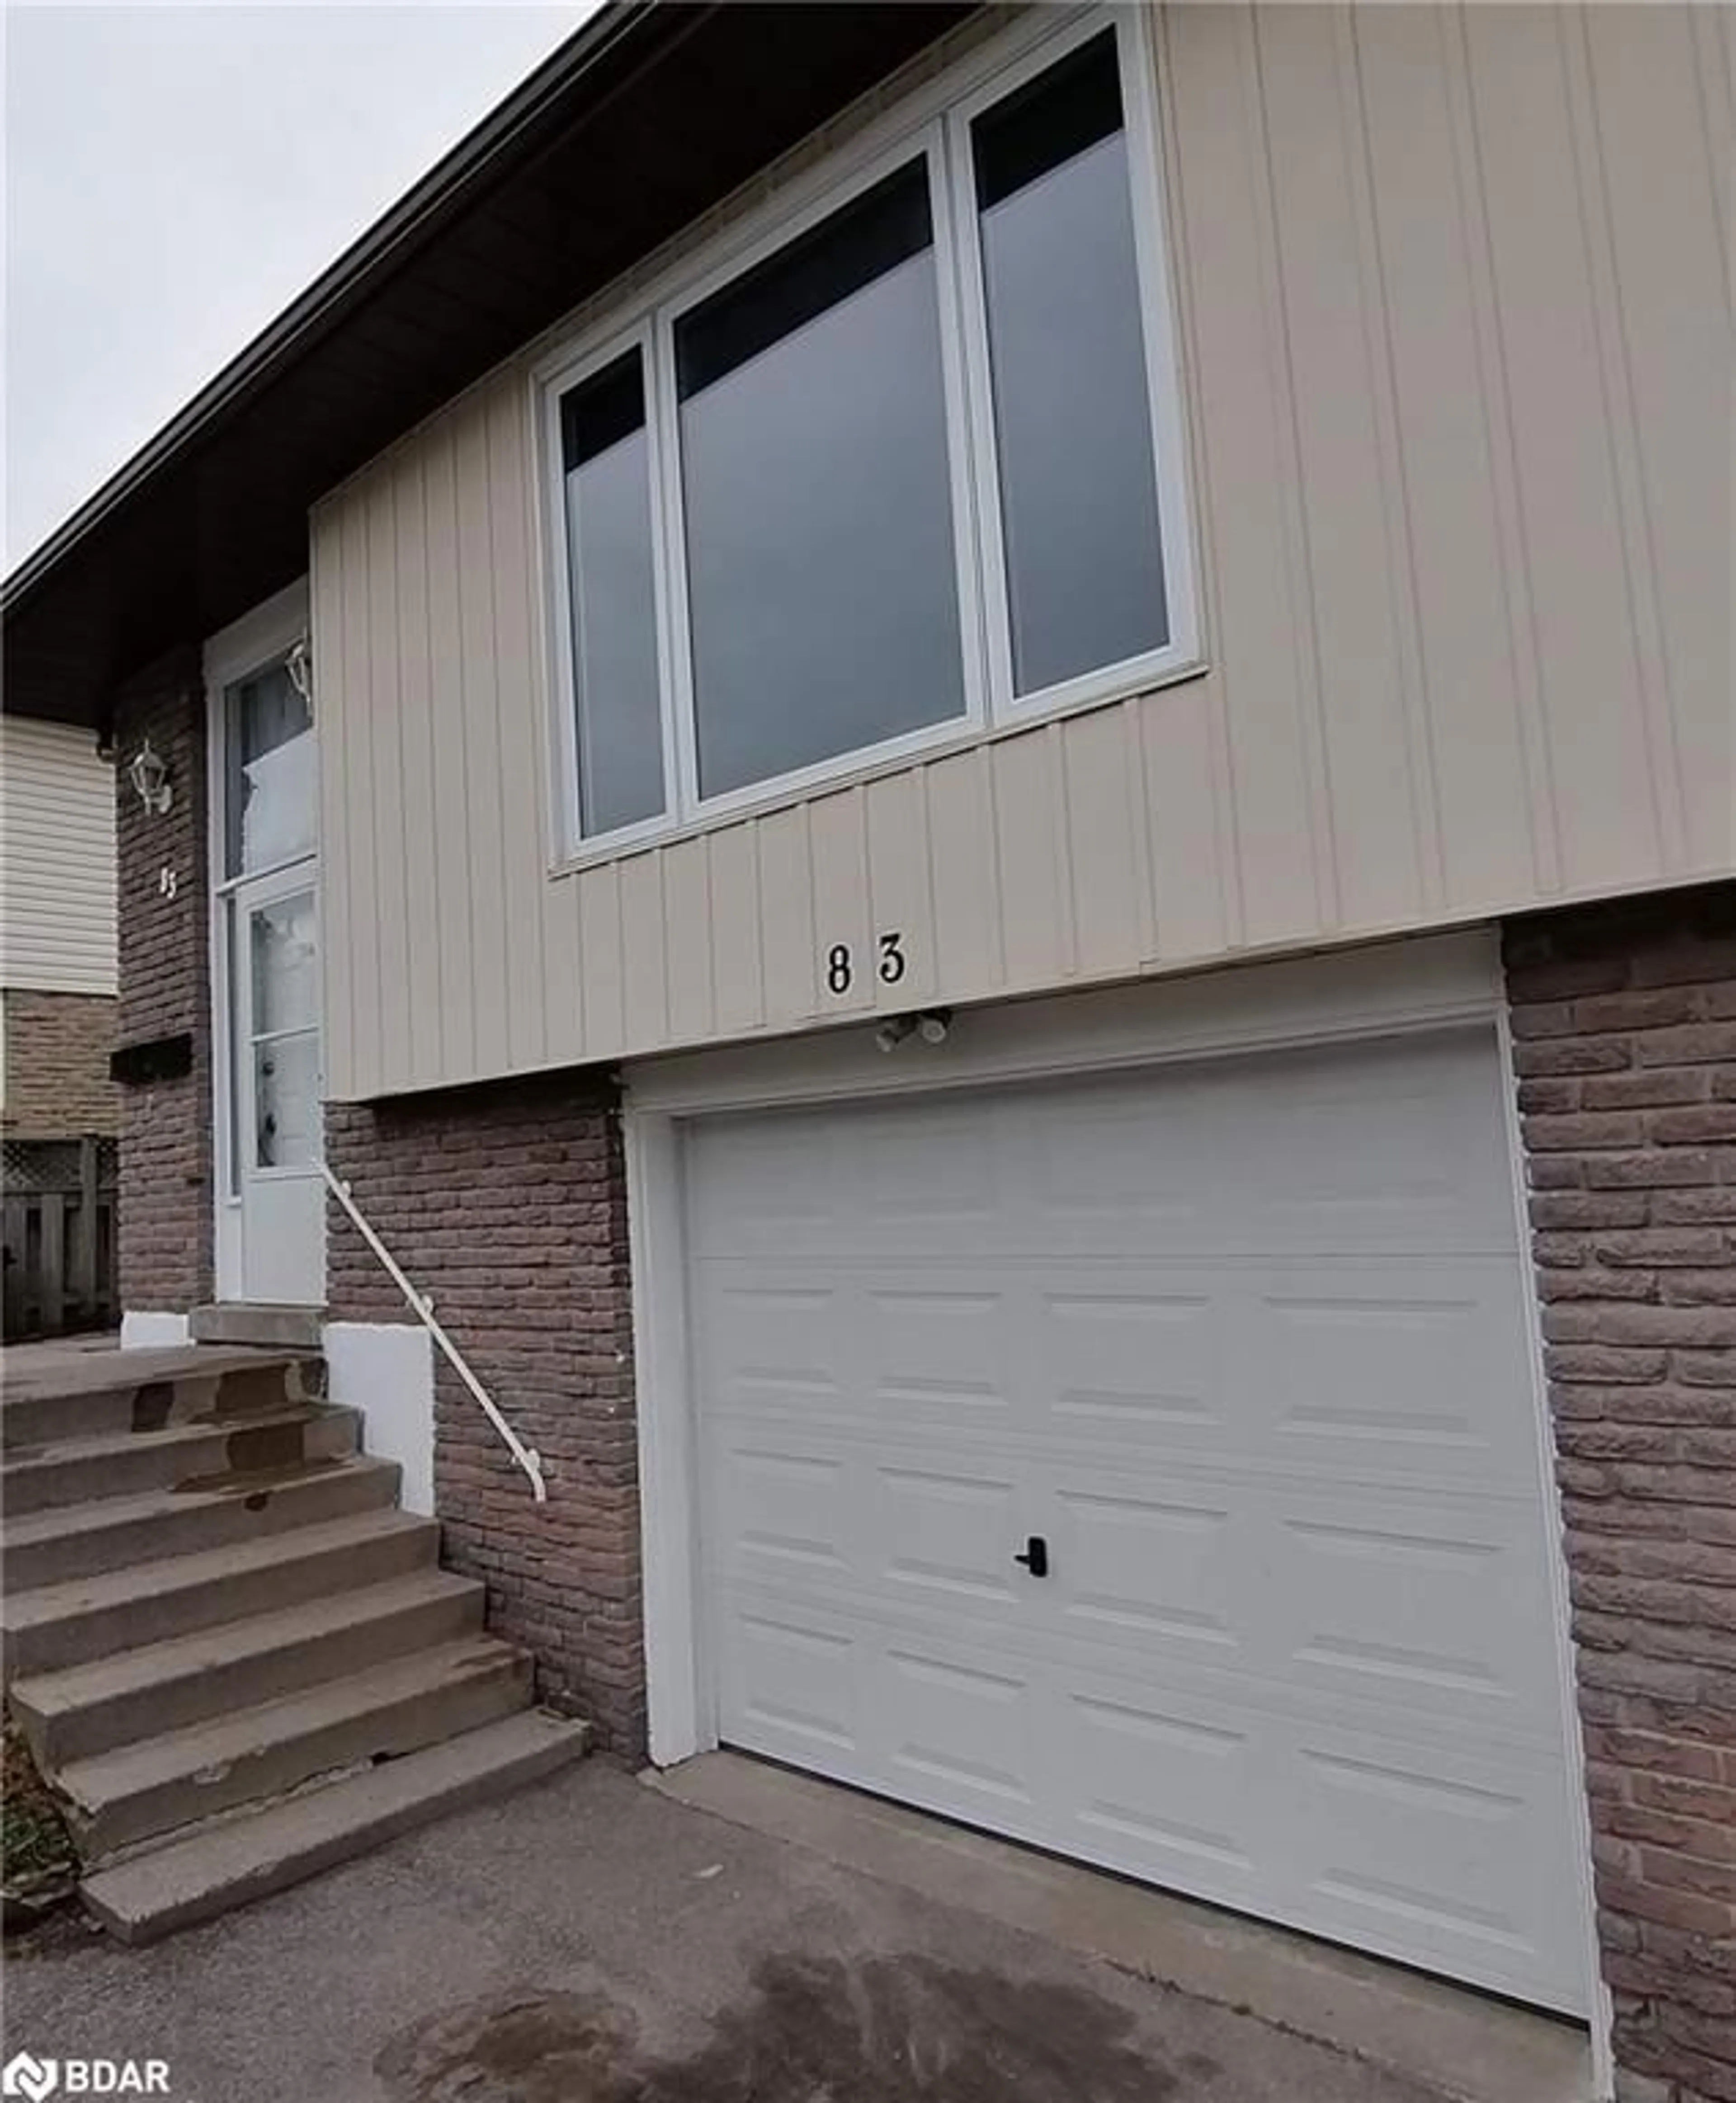 Frontside or backside of a home for 83 Daphne Cres, Barrie Ontario L4M 2Y7